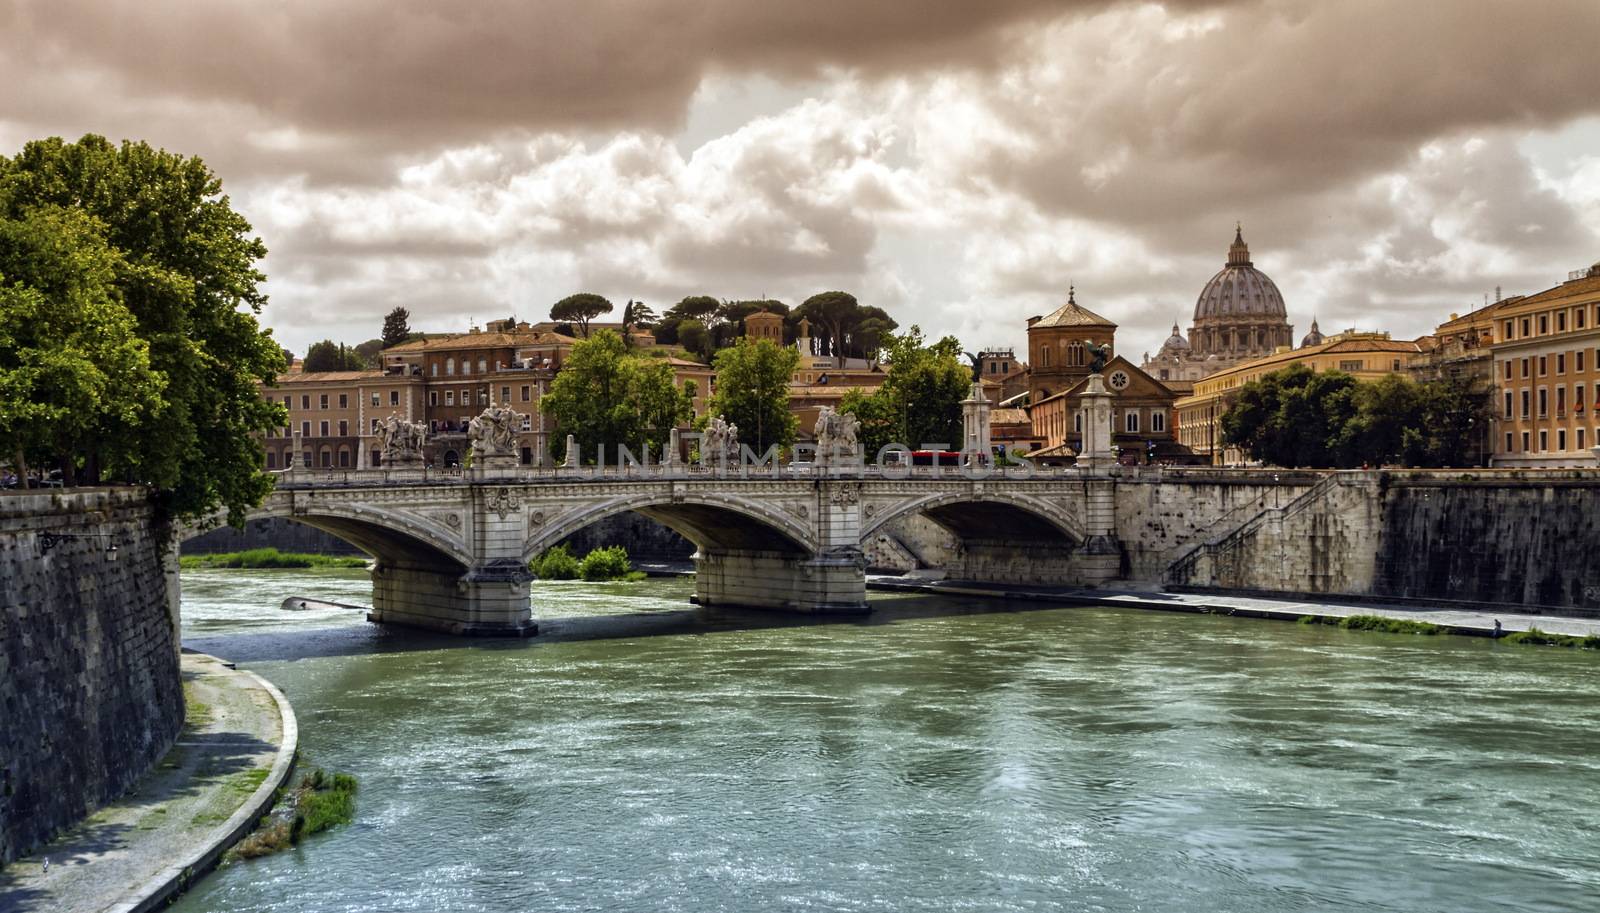 Tiber river, Ponte Sant'Angelo and St. Peter's cathedral, Roma, Italy by Elenaphotos21